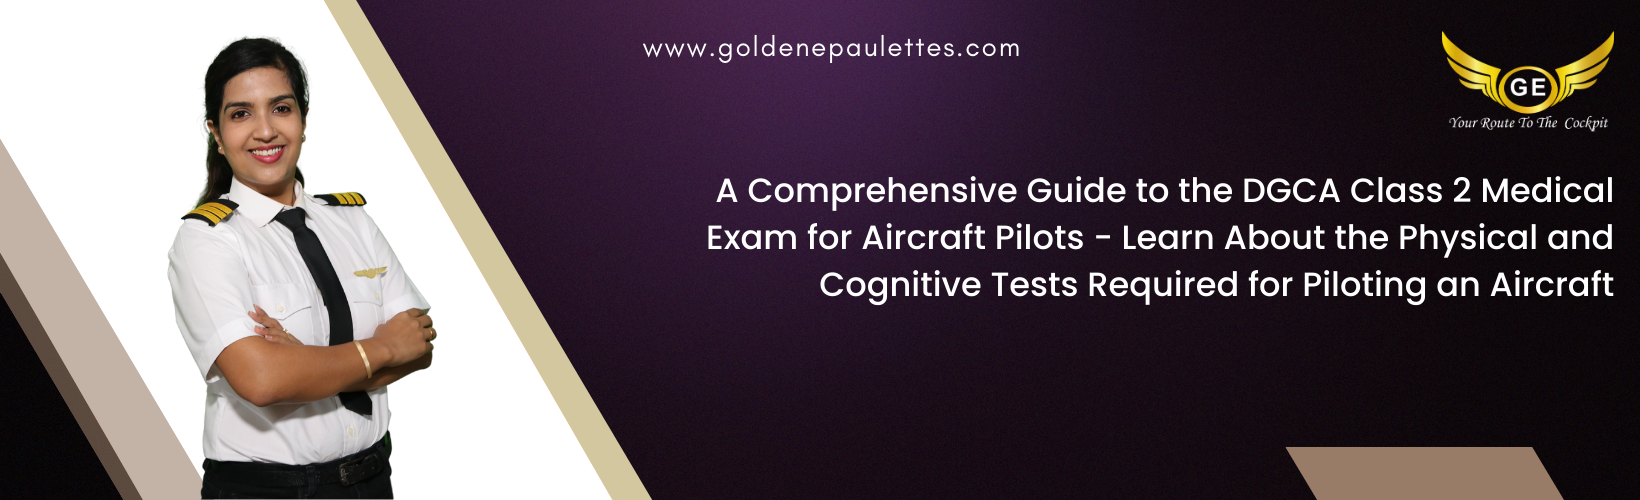 A Guide to the DGCA Class 2 Medical Exam for Aircraft Pilots - This article will provide a comprehensive guide to the DGCA Class 2 Medical Exam for Aircraft Pilots. It will discuss the various components of the exam, such as the physical and cognitive tests. (Reference